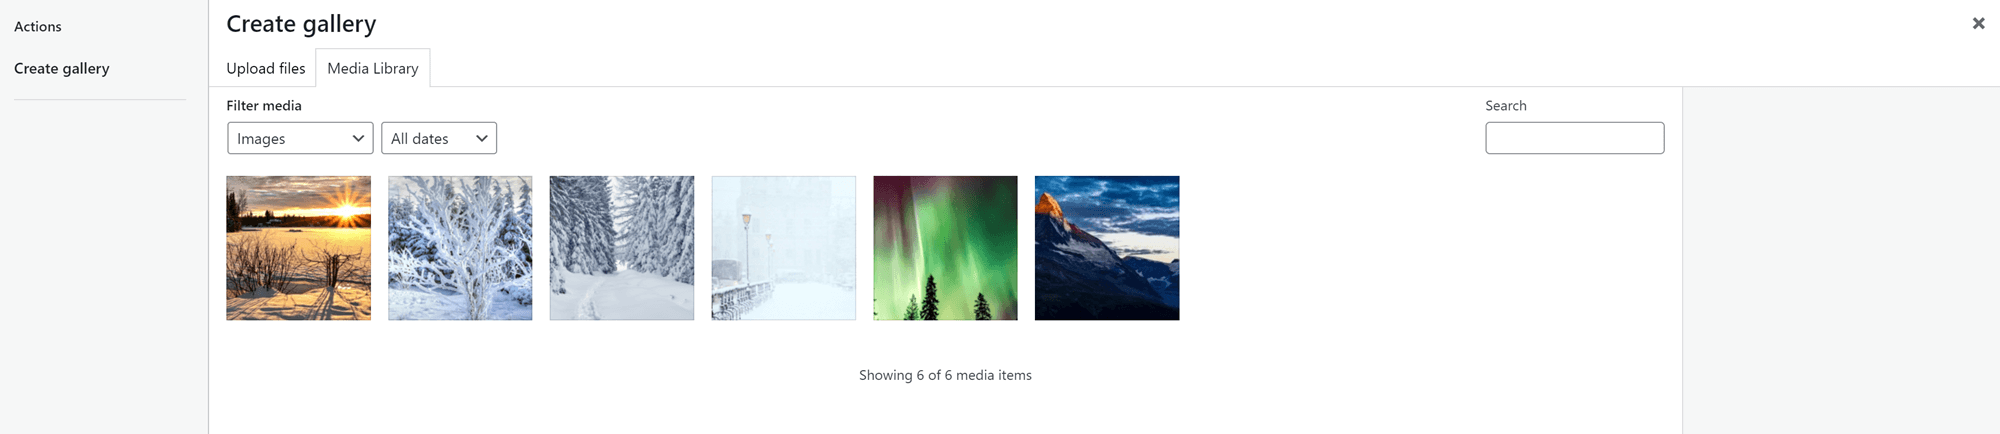 How to create a gallery in WordPress: Media Library